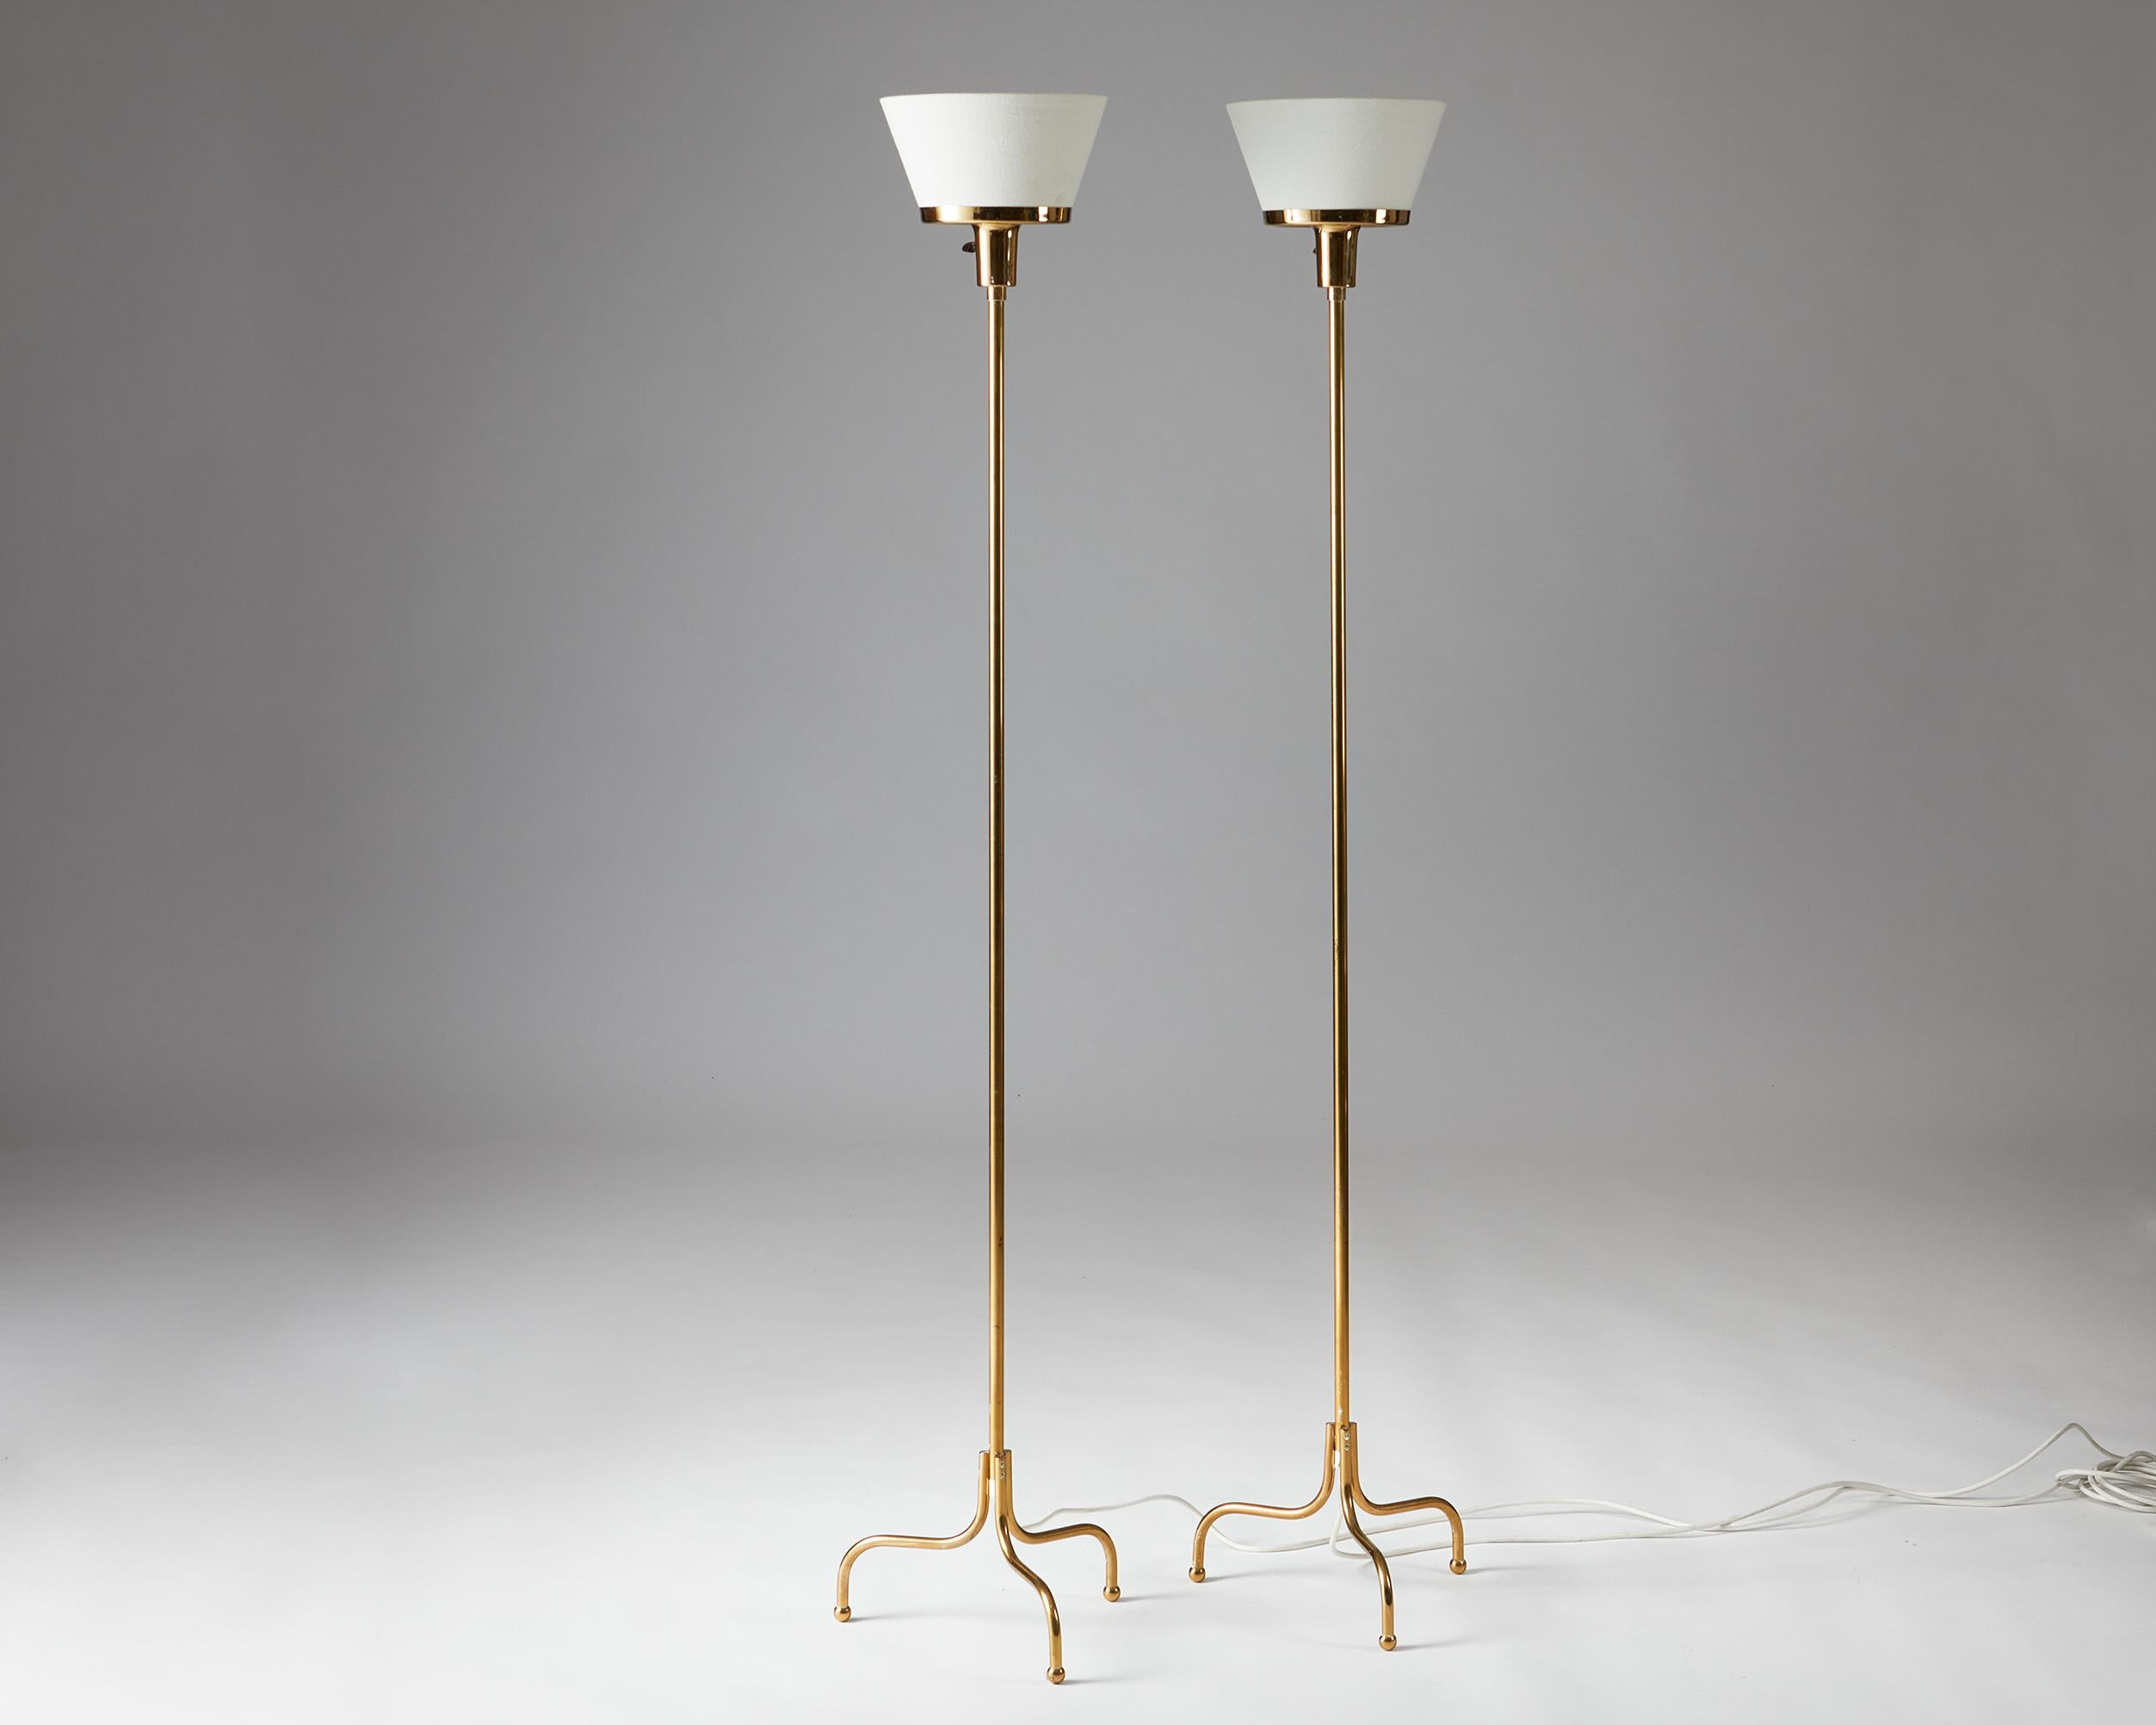 Pair of floor lamps ‘Model 2424’ designed by Josef Frank for Svenskt Tenn,
Sweden, 1930s.

Brass and silk shades.

Early model.

H: 162 cm
W: 33 cm

Josef Frank was a true European, he was also a pioneer of what would become classic 20th century